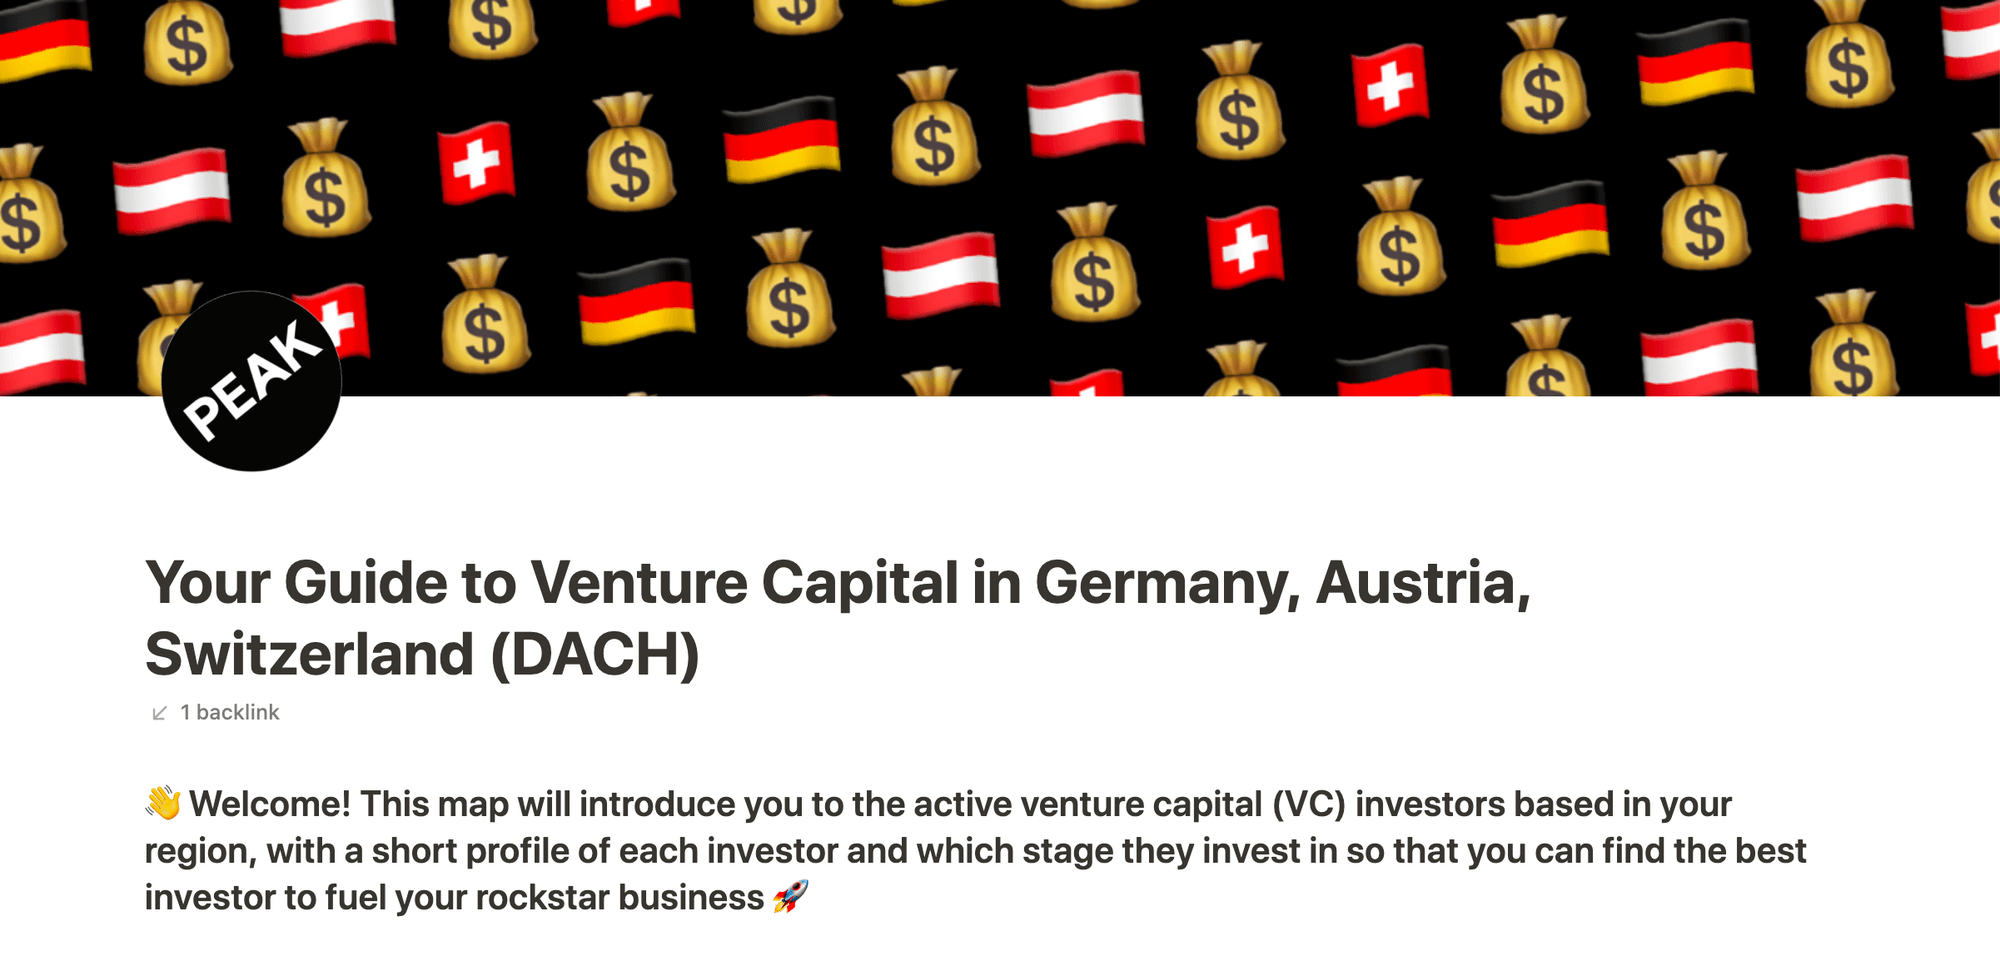 Your Guide to Venture Capital in Germany, Austria, Switzerland | DACH